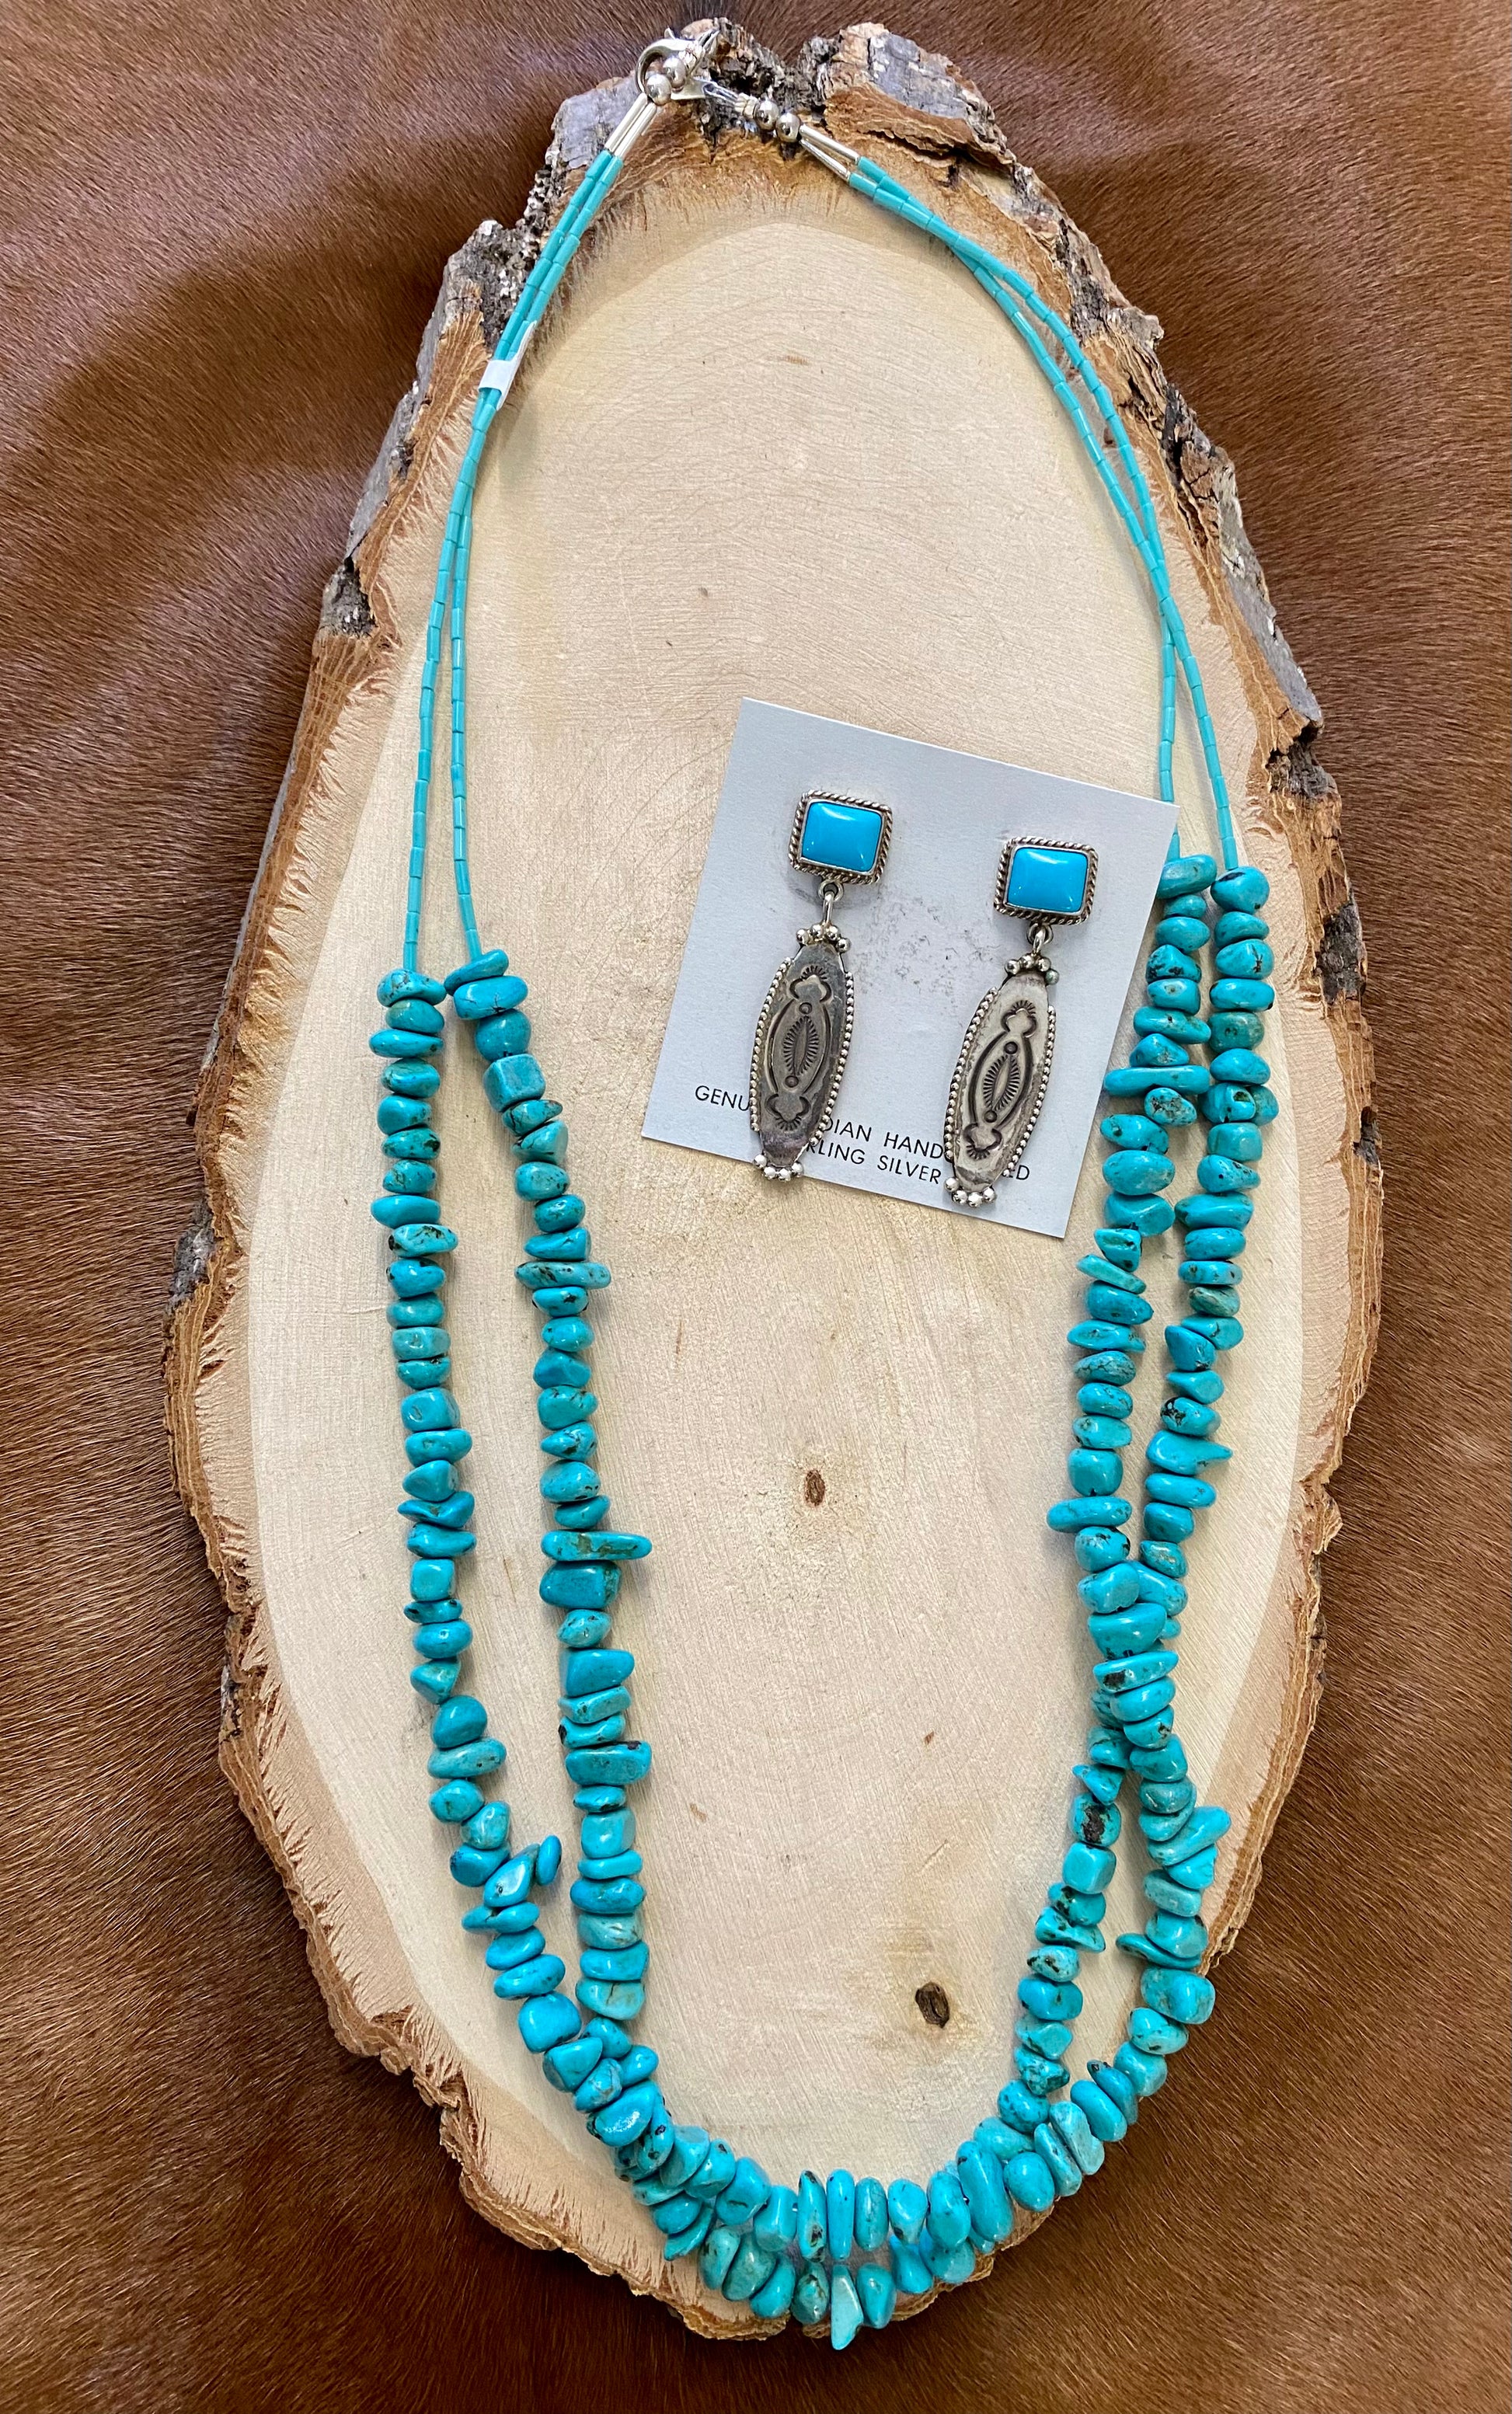 This handmade 27” inches length necklace is an absolute beauty. A stunning Native-made two-strand turquoise sliced beads necklace. Layer it or wear it alone or add a pendant to keep your look totally unique. The perfect dainty layering piece! Simple, yet striking!   Size: 27” Inches Length   Stone: Turquoise 